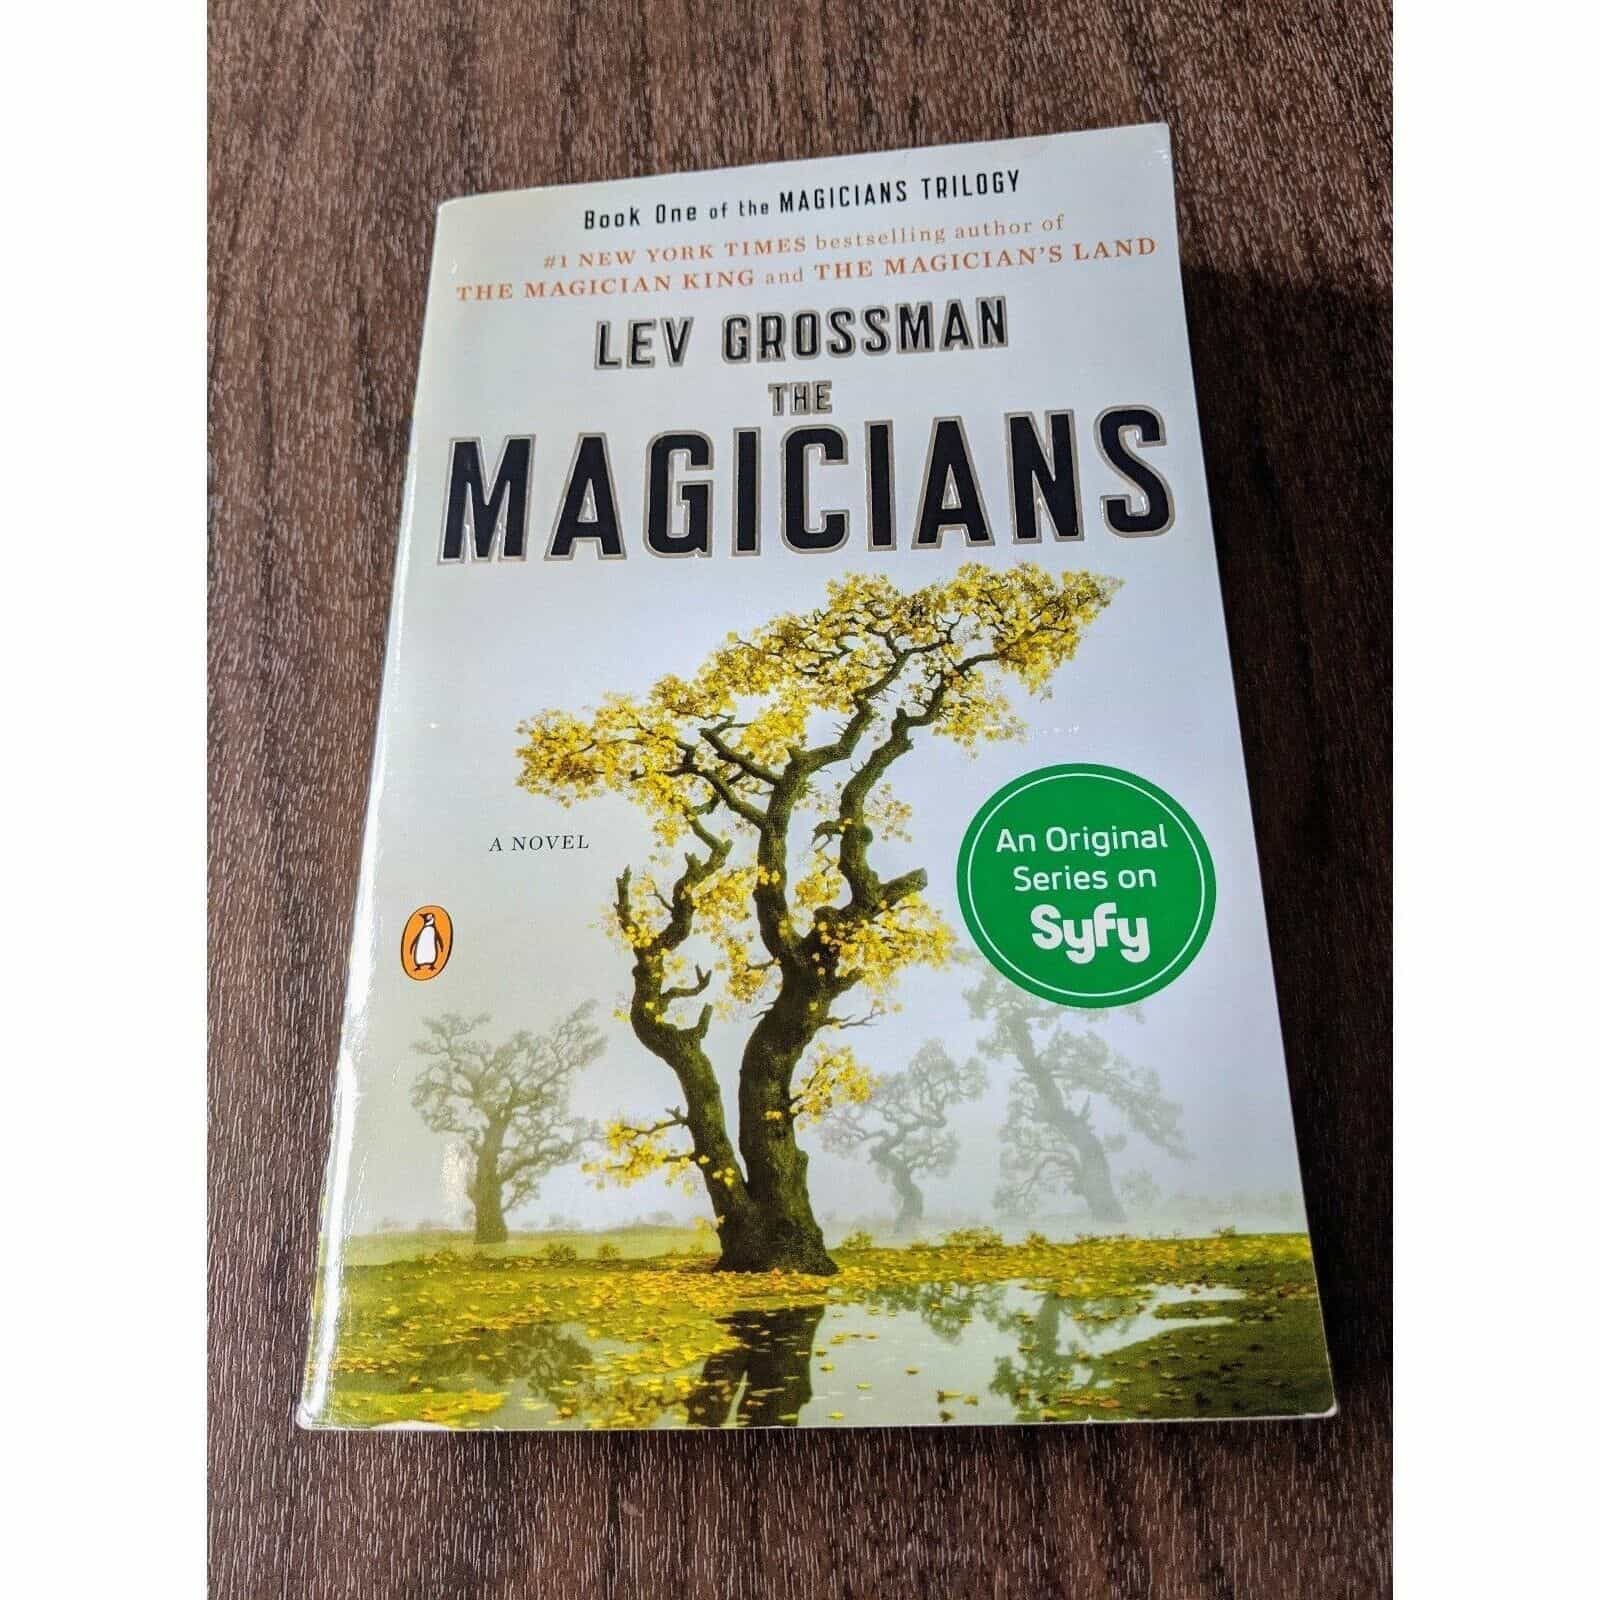 The Magicians by Lev Grossman Book